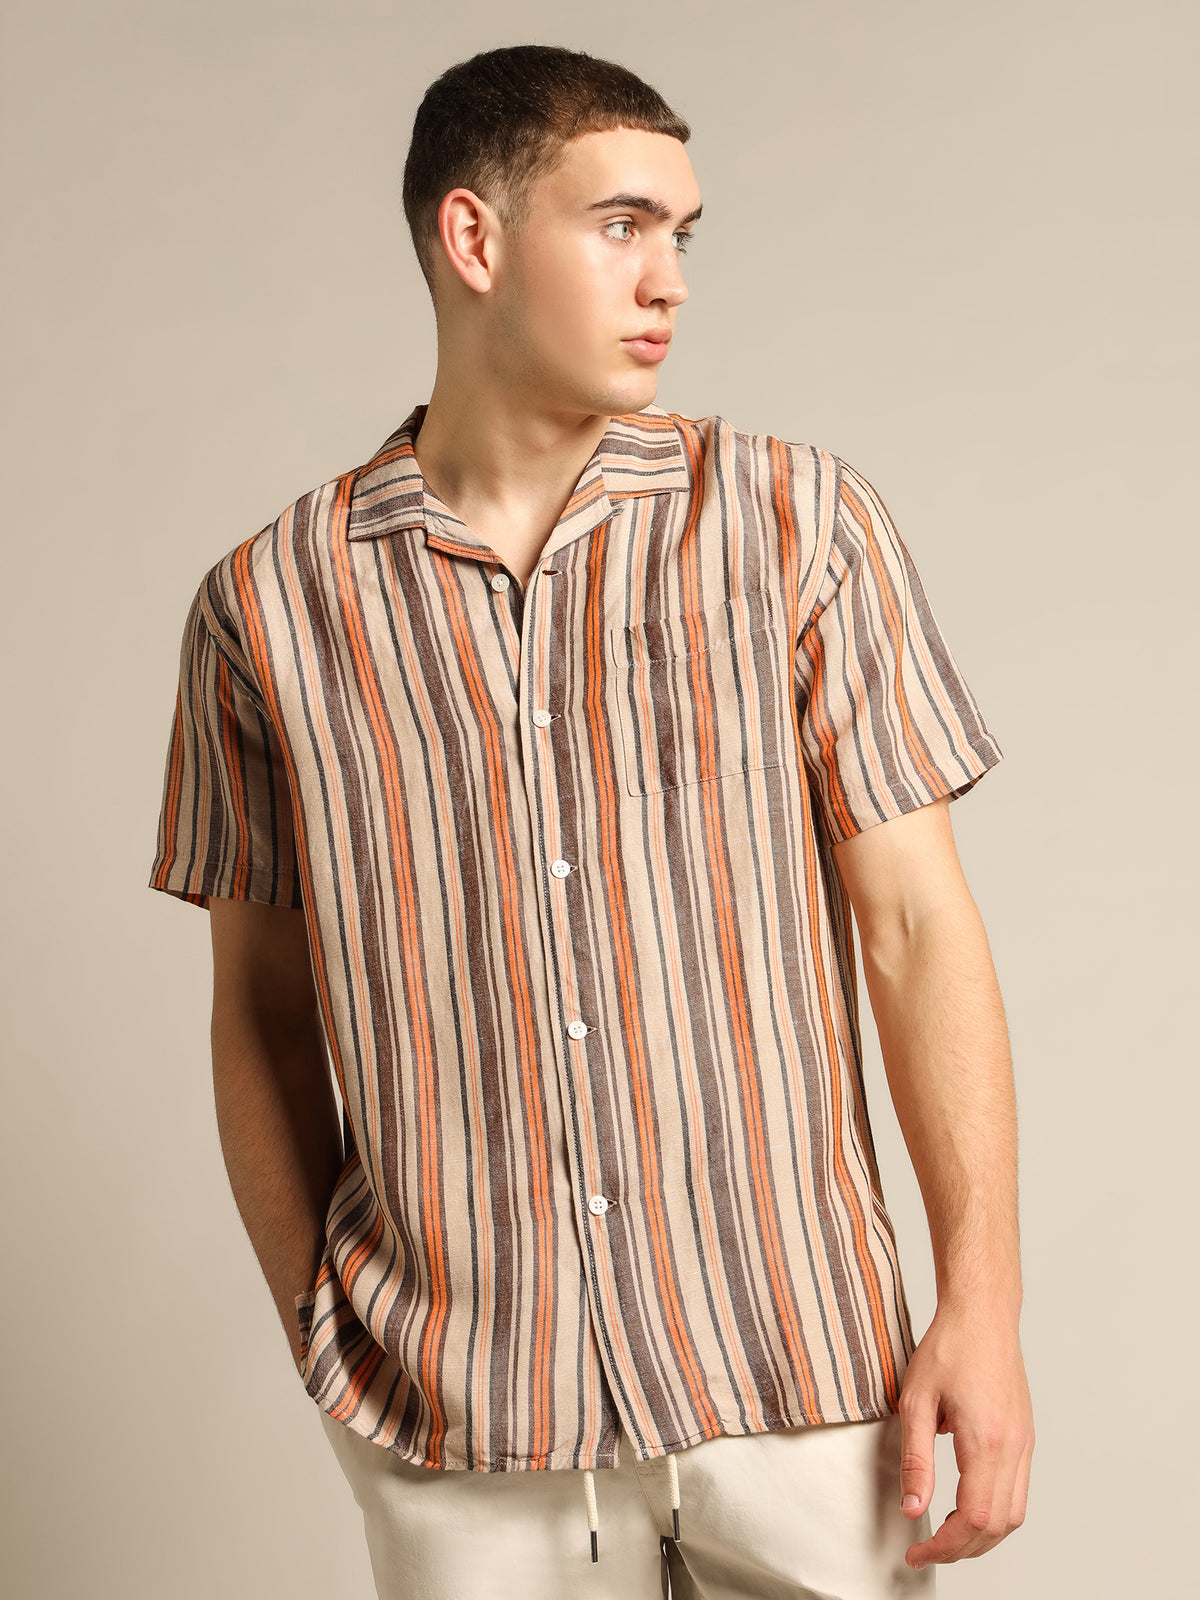 Coney Short Sleeve Shirt in Coffee Stripes